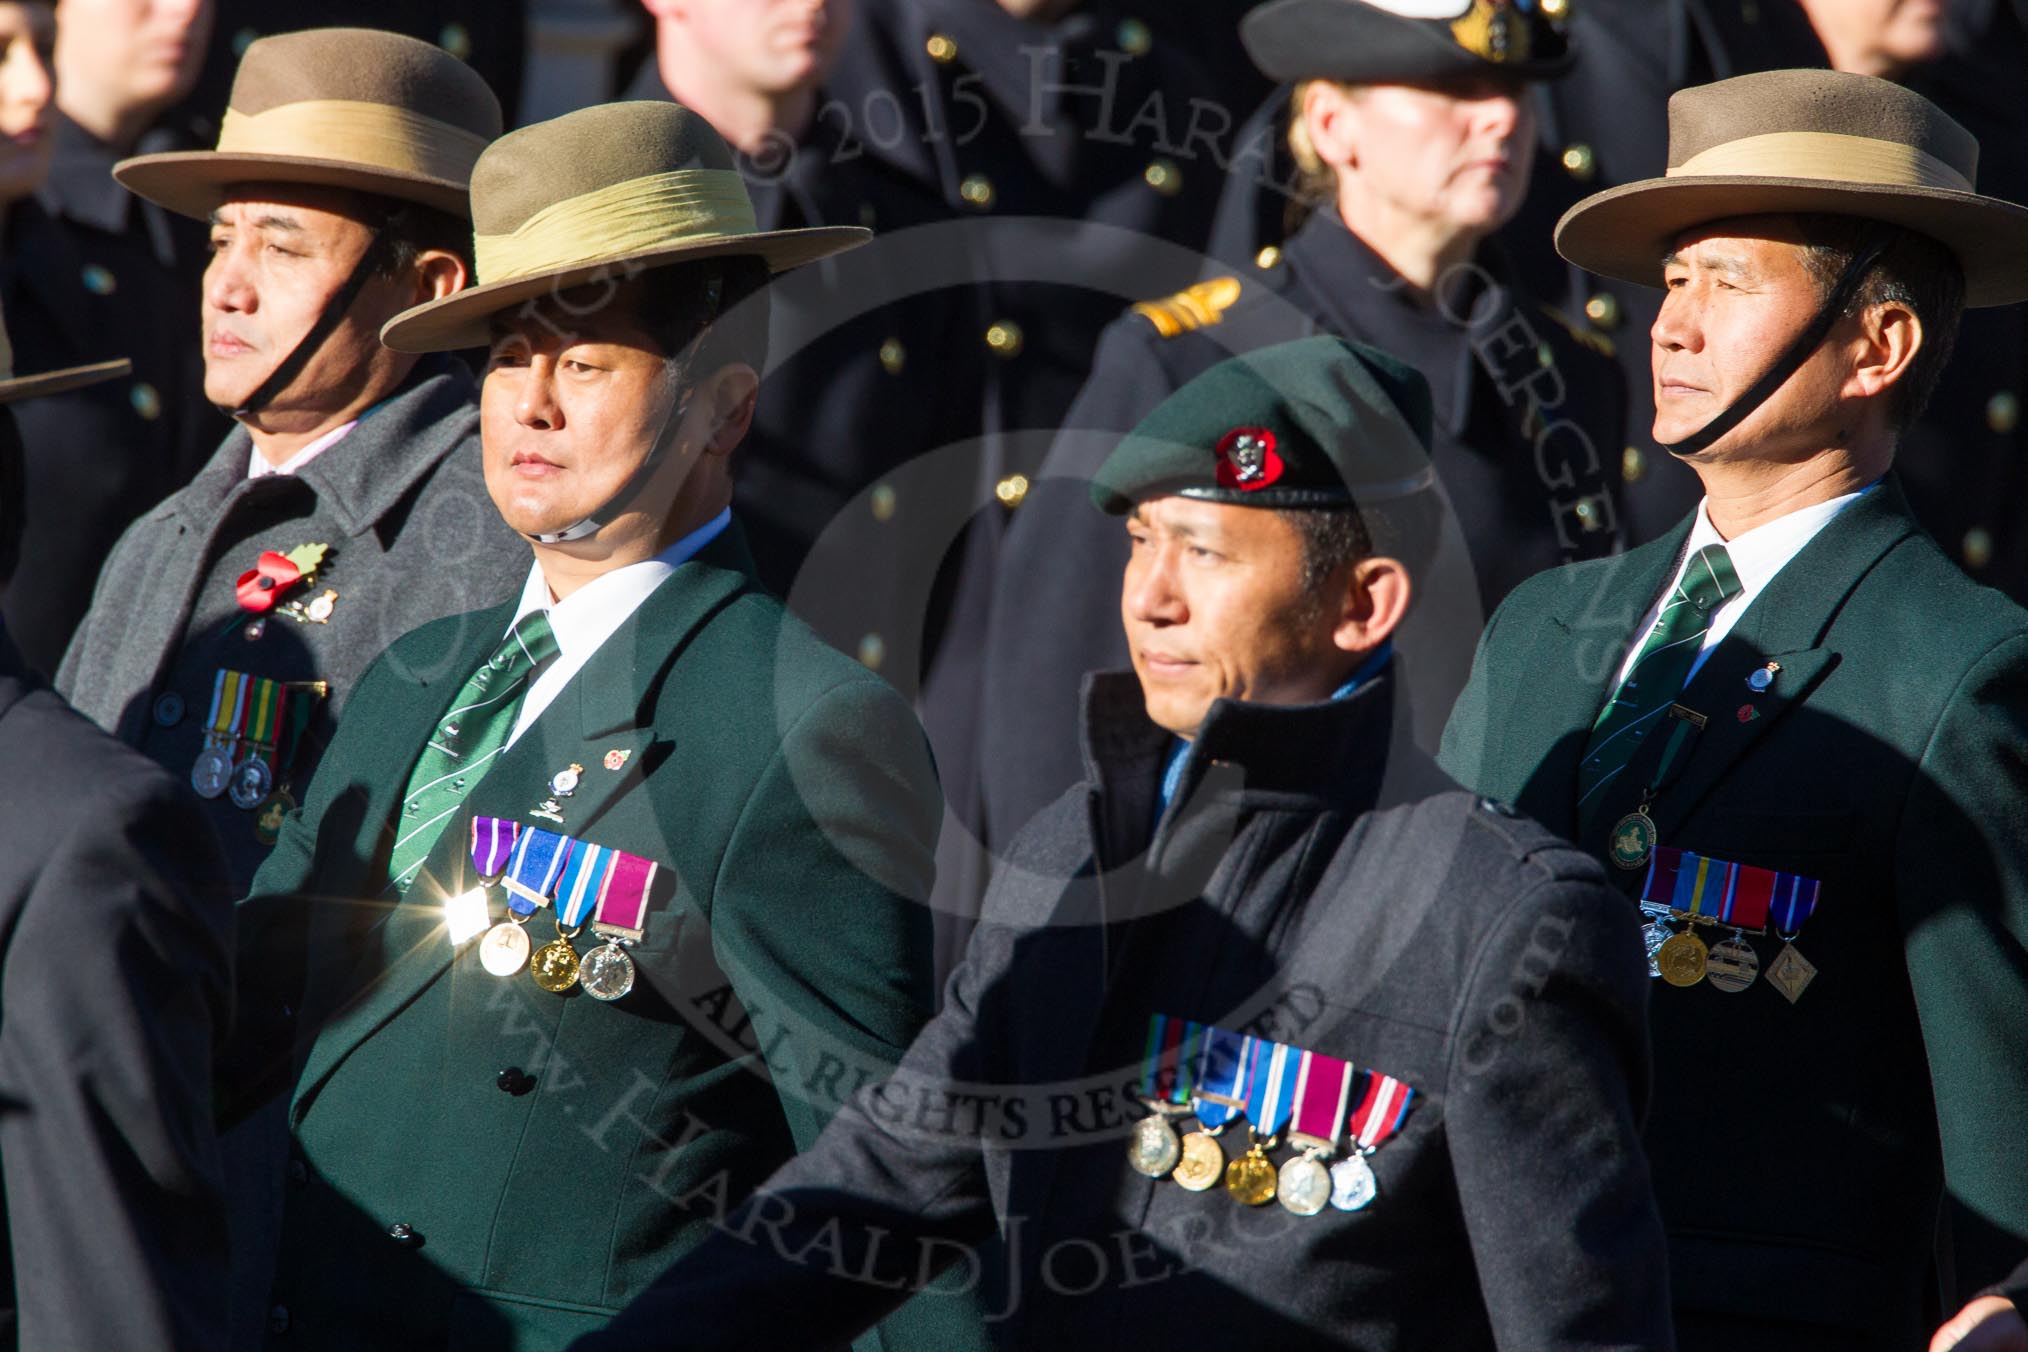 Remembrance Sunday Cenotaph March Past 2013: D2 - British Gurkha Welfare Association..
Press stand opposite the Foreign Office building, Whitehall, London SW1,
London,
Greater London,
United Kingdom,
on 10 November 2013 at 11:38, image #43